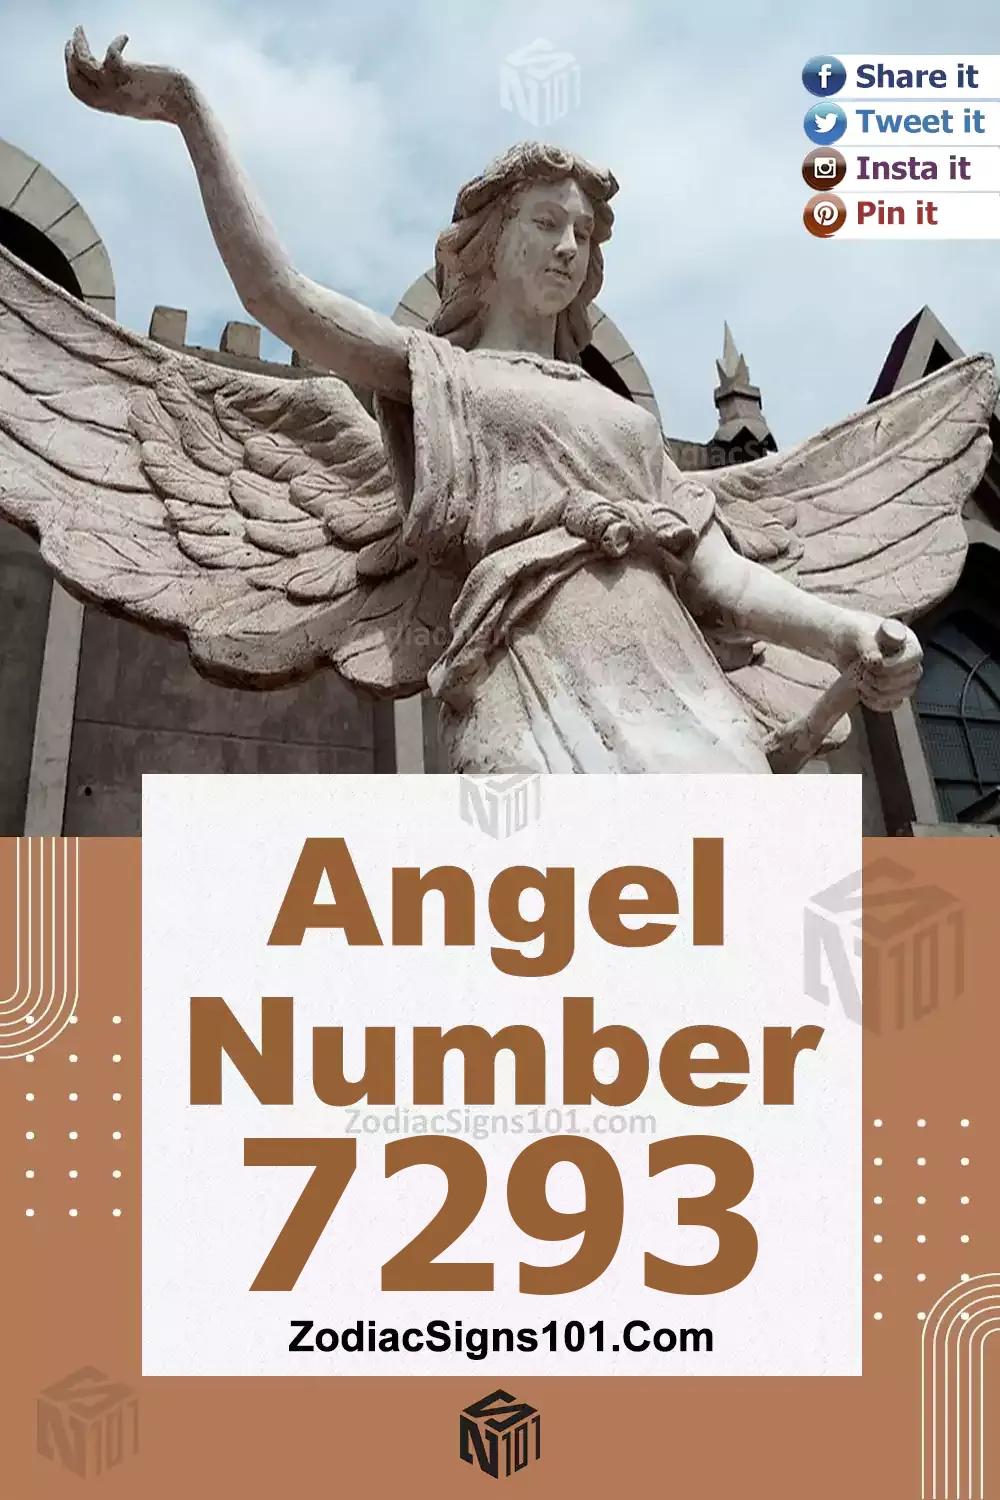 7293 Angel Number Meaning